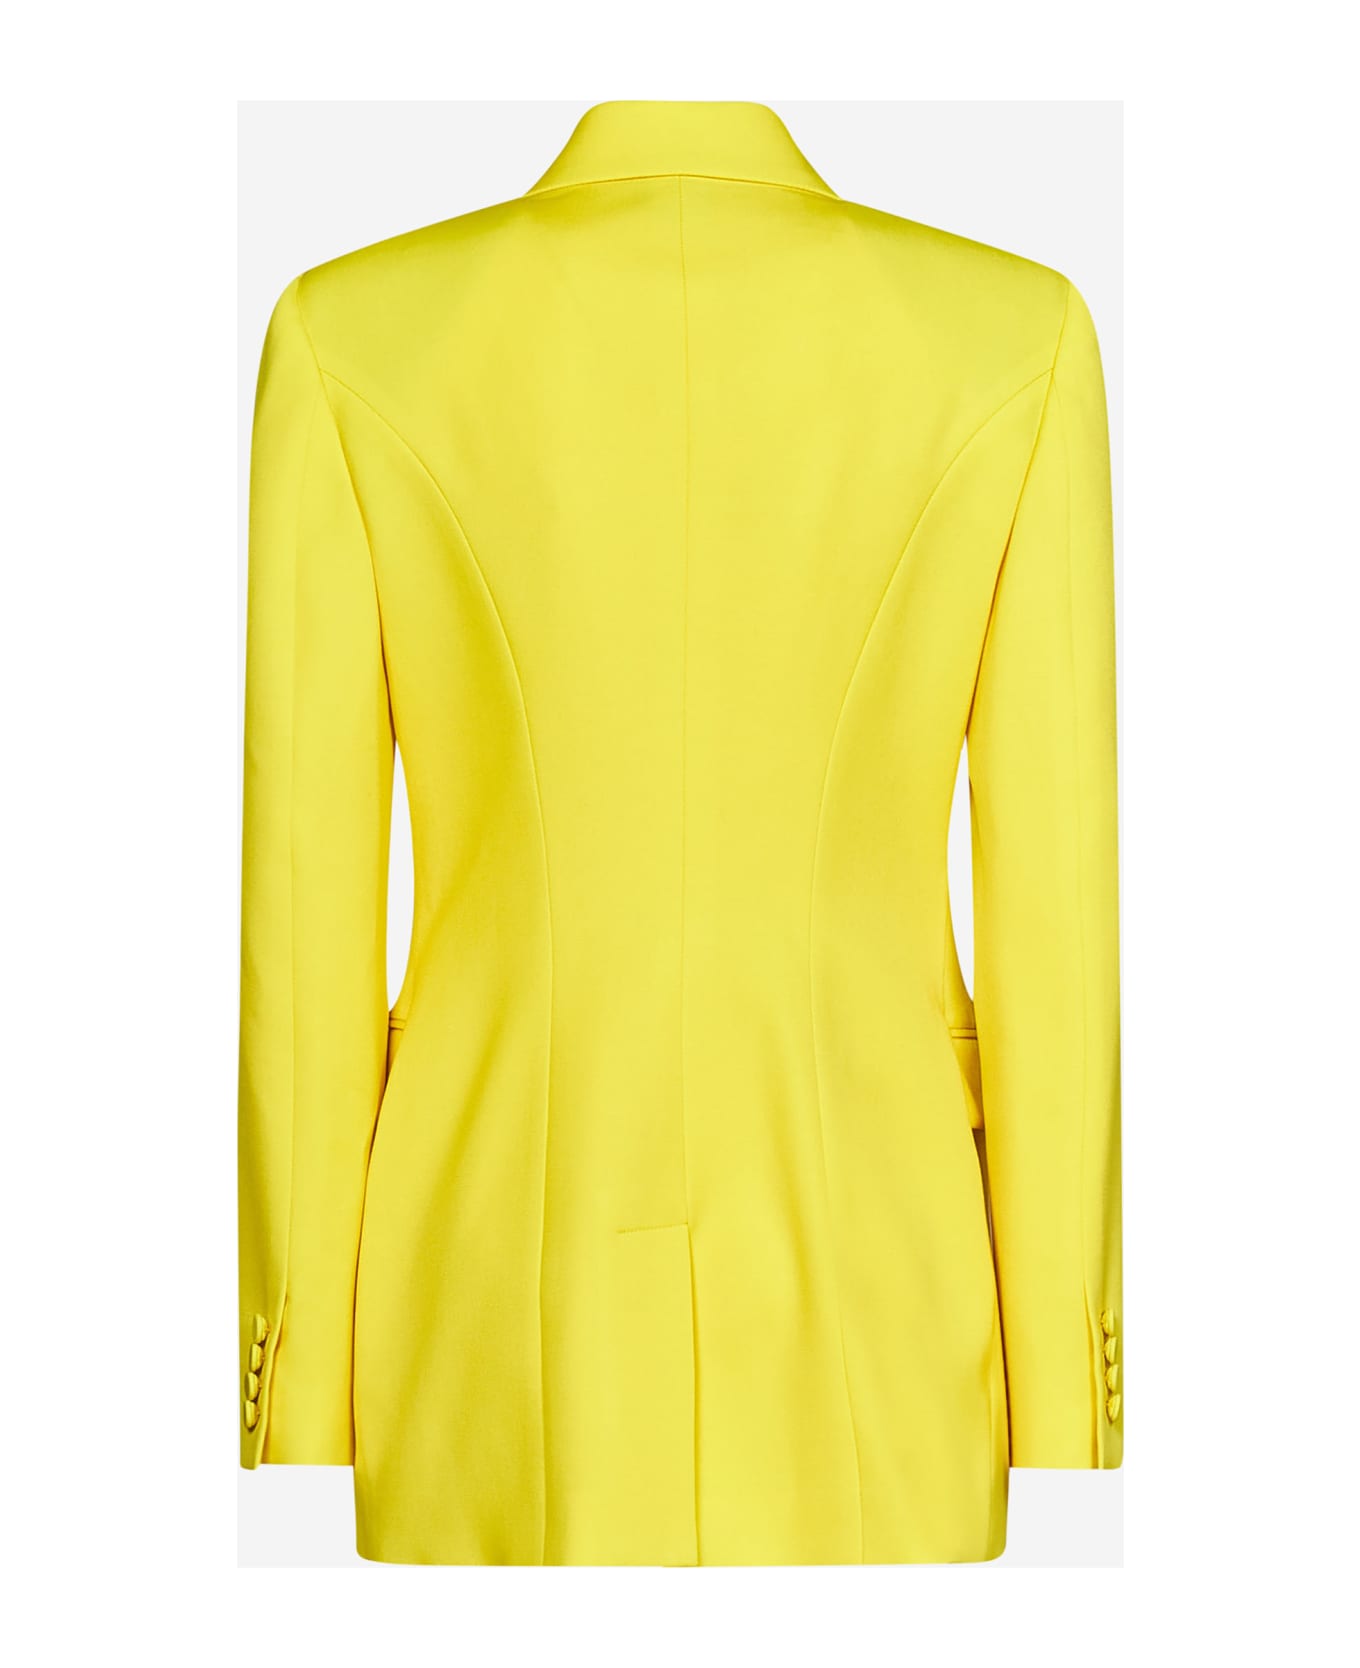 Alexander McQueen Fitted Db Dinner Jacket - Yellow